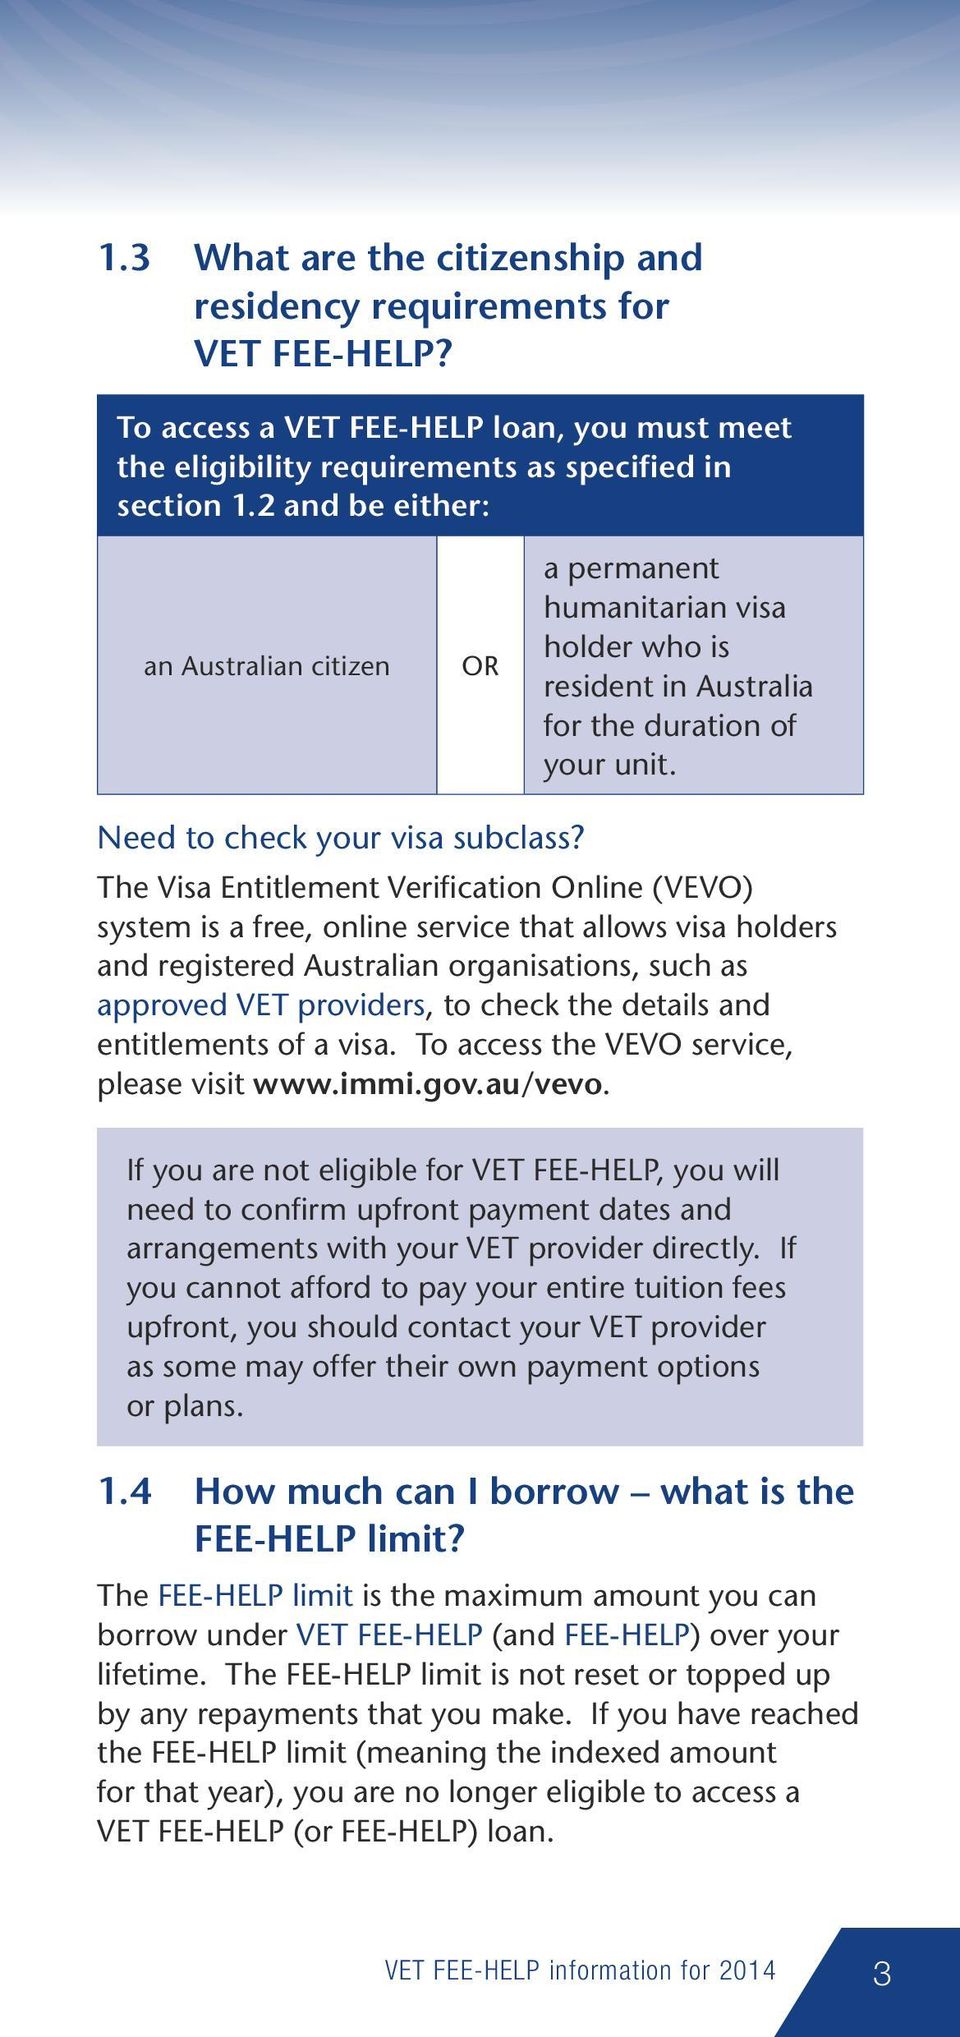 The Visa Entitlement Verification Online (VEVO) system is a free, online service that allows visa holders and registered Australian organisations, such as approved VET providers, to check the details